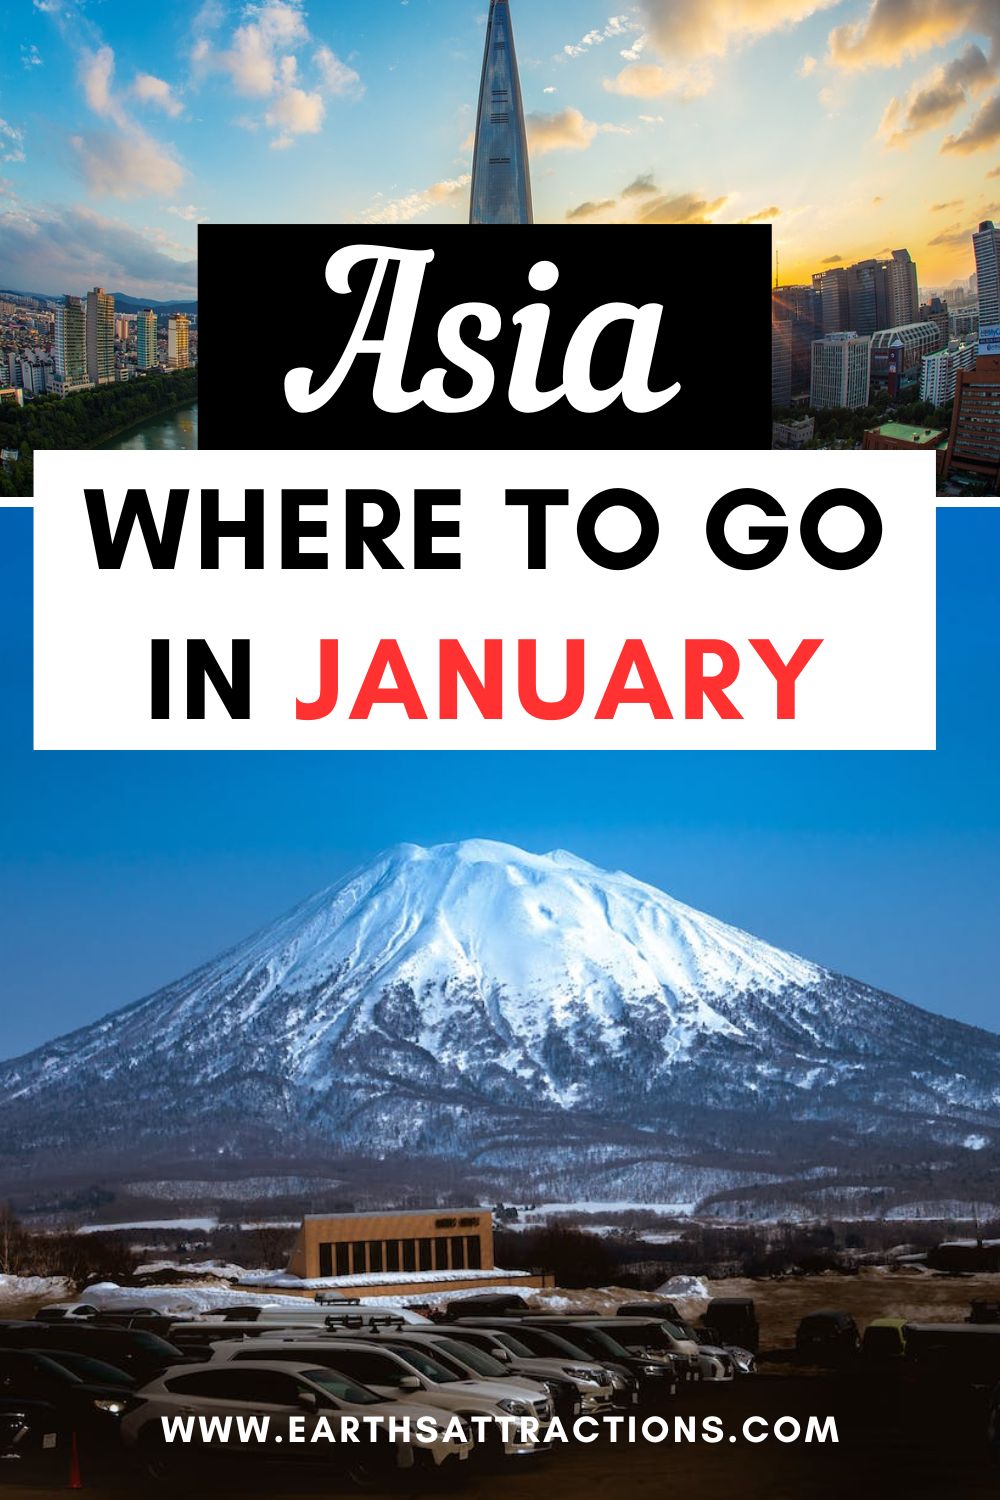 Where to go in Asia in January  Read this article  to discover the top Asia destinations in January. These are the best places to visit in January in Asia! #asia #asiatravel #asiadestinations #january #januarytravel #traveldestinations 